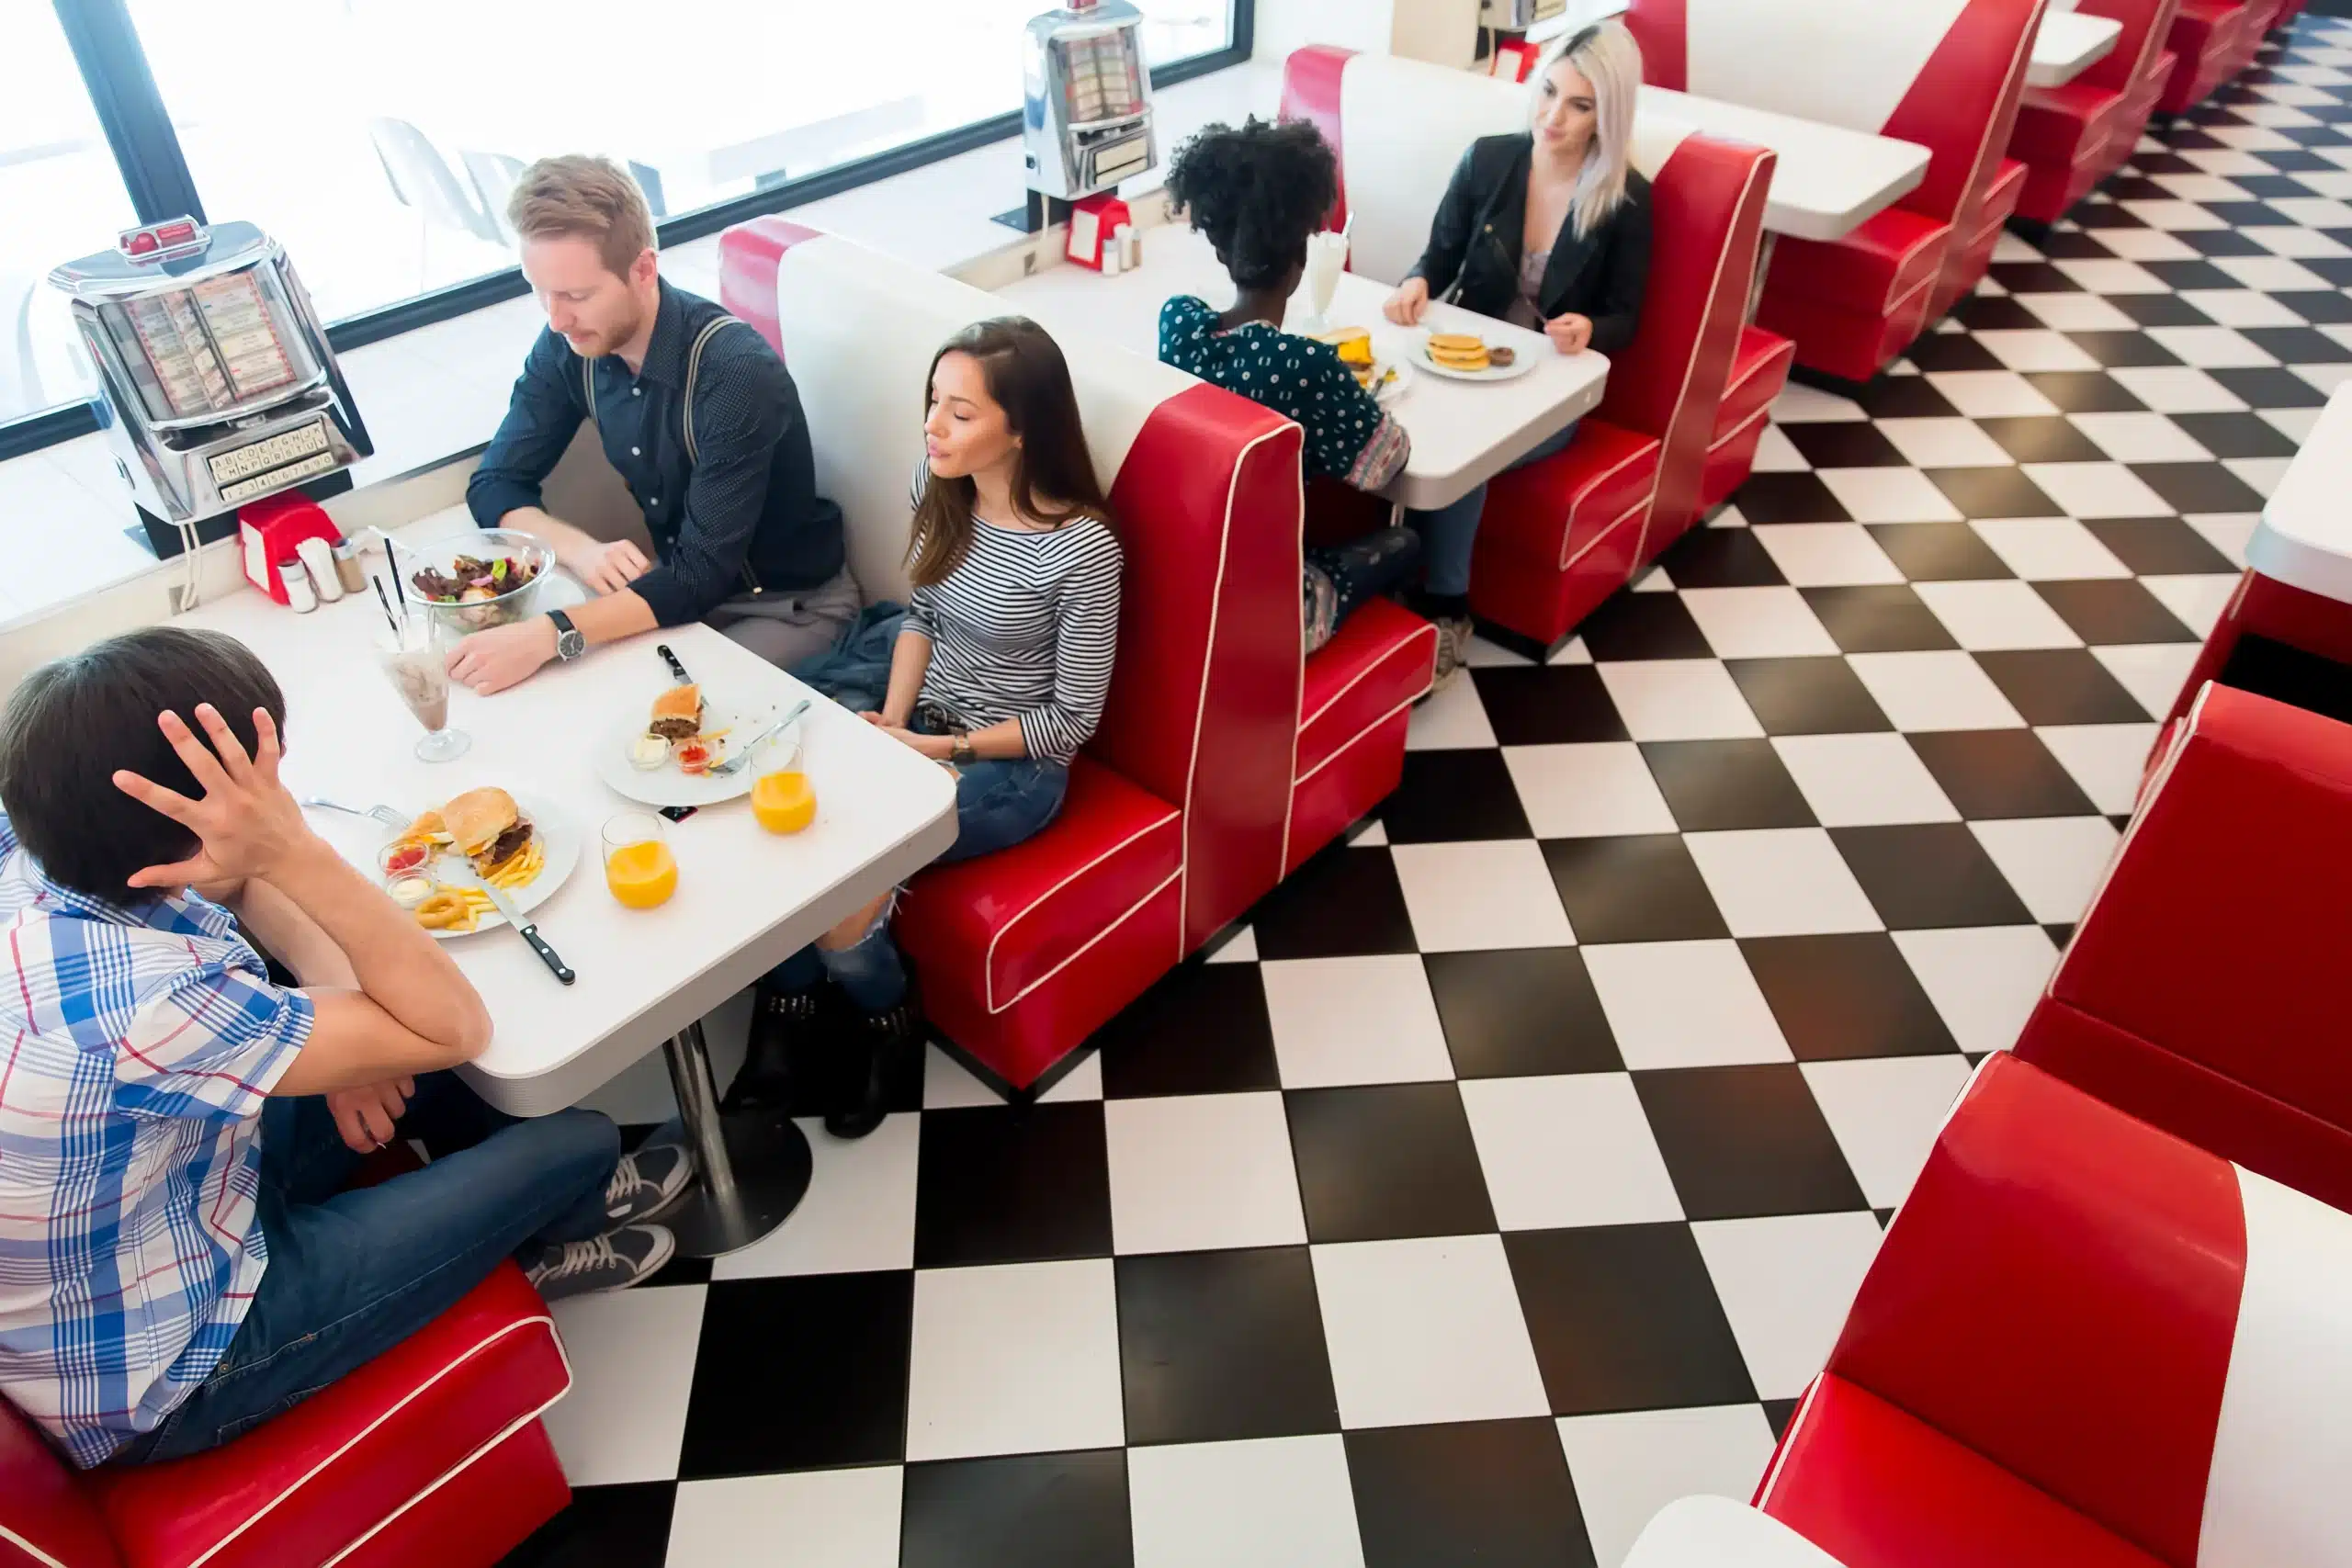 A classic diner is an excellent choice for a Best Lunch Places for Office Team Bonding